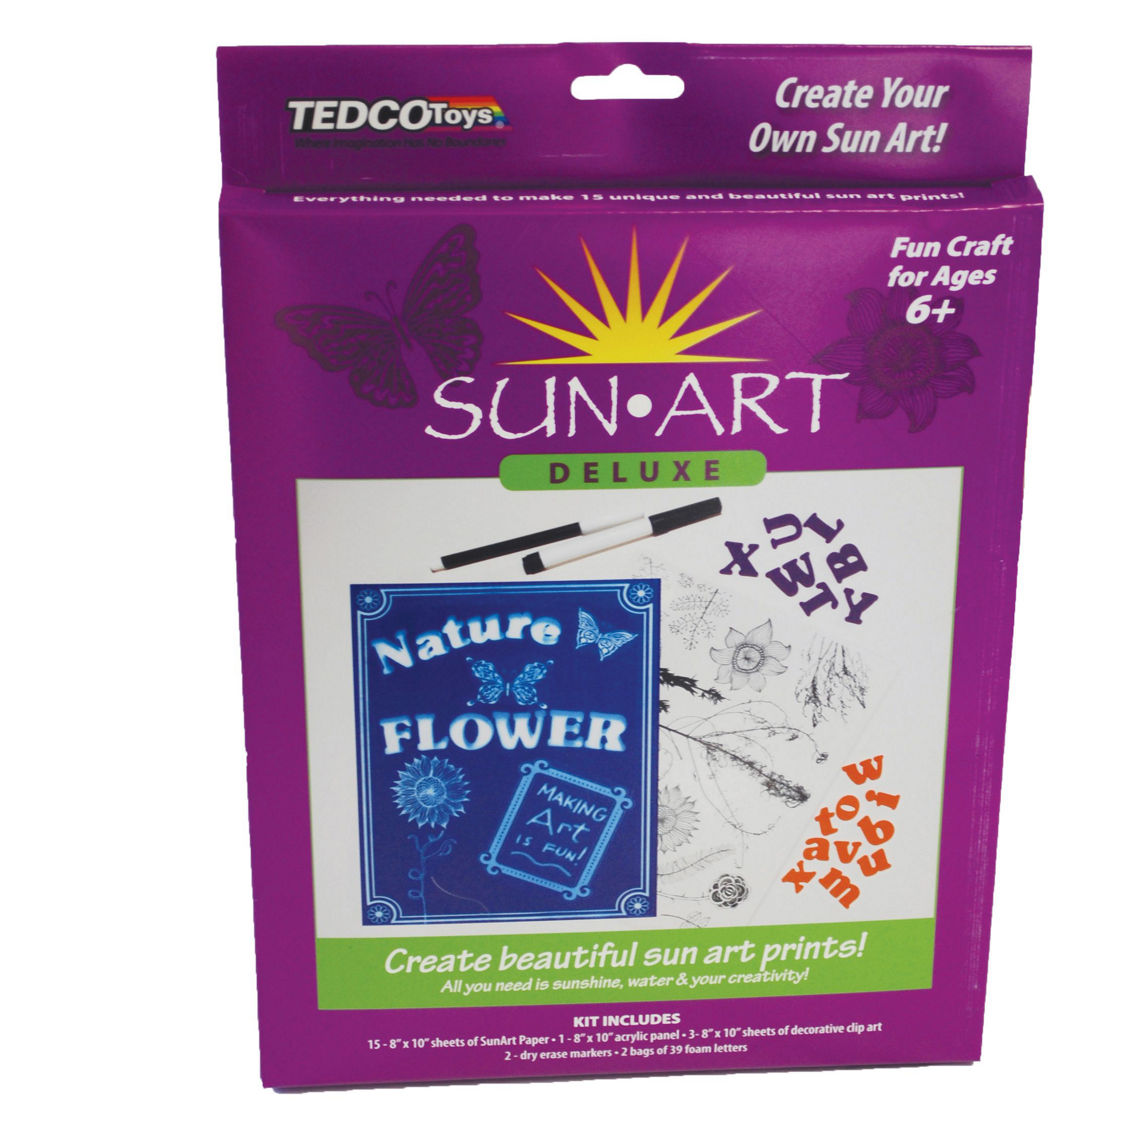 Tedco Toys SunArt Deluxe Kit - Image 2 of 2